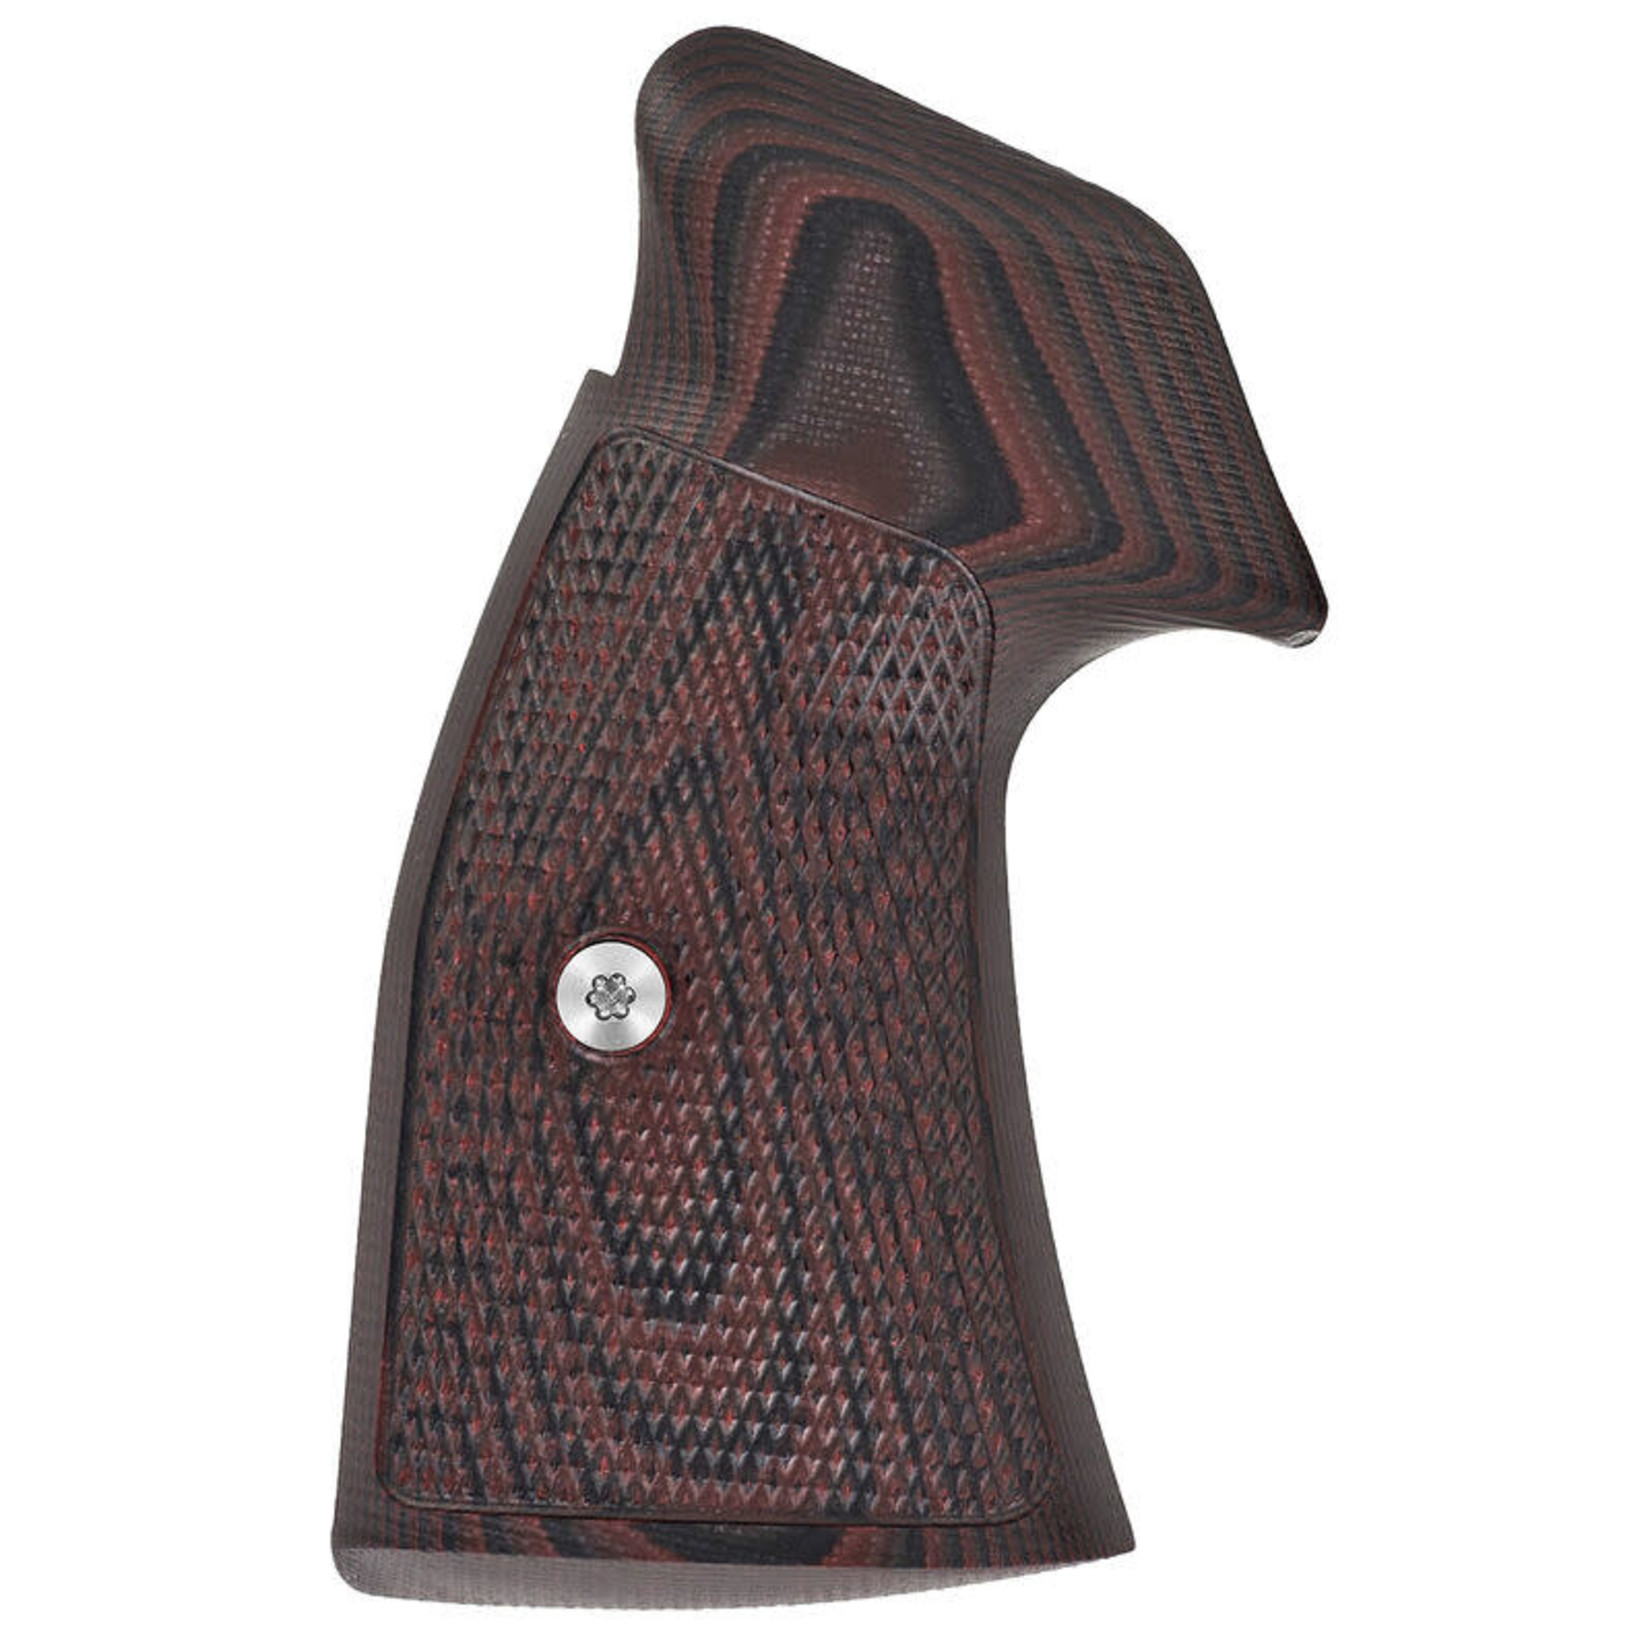 VZ GRIPS TACTICAL DIAMOND G10 GRIPS FOR SMITH & WESSON K L FRAME BLACK CHERRY